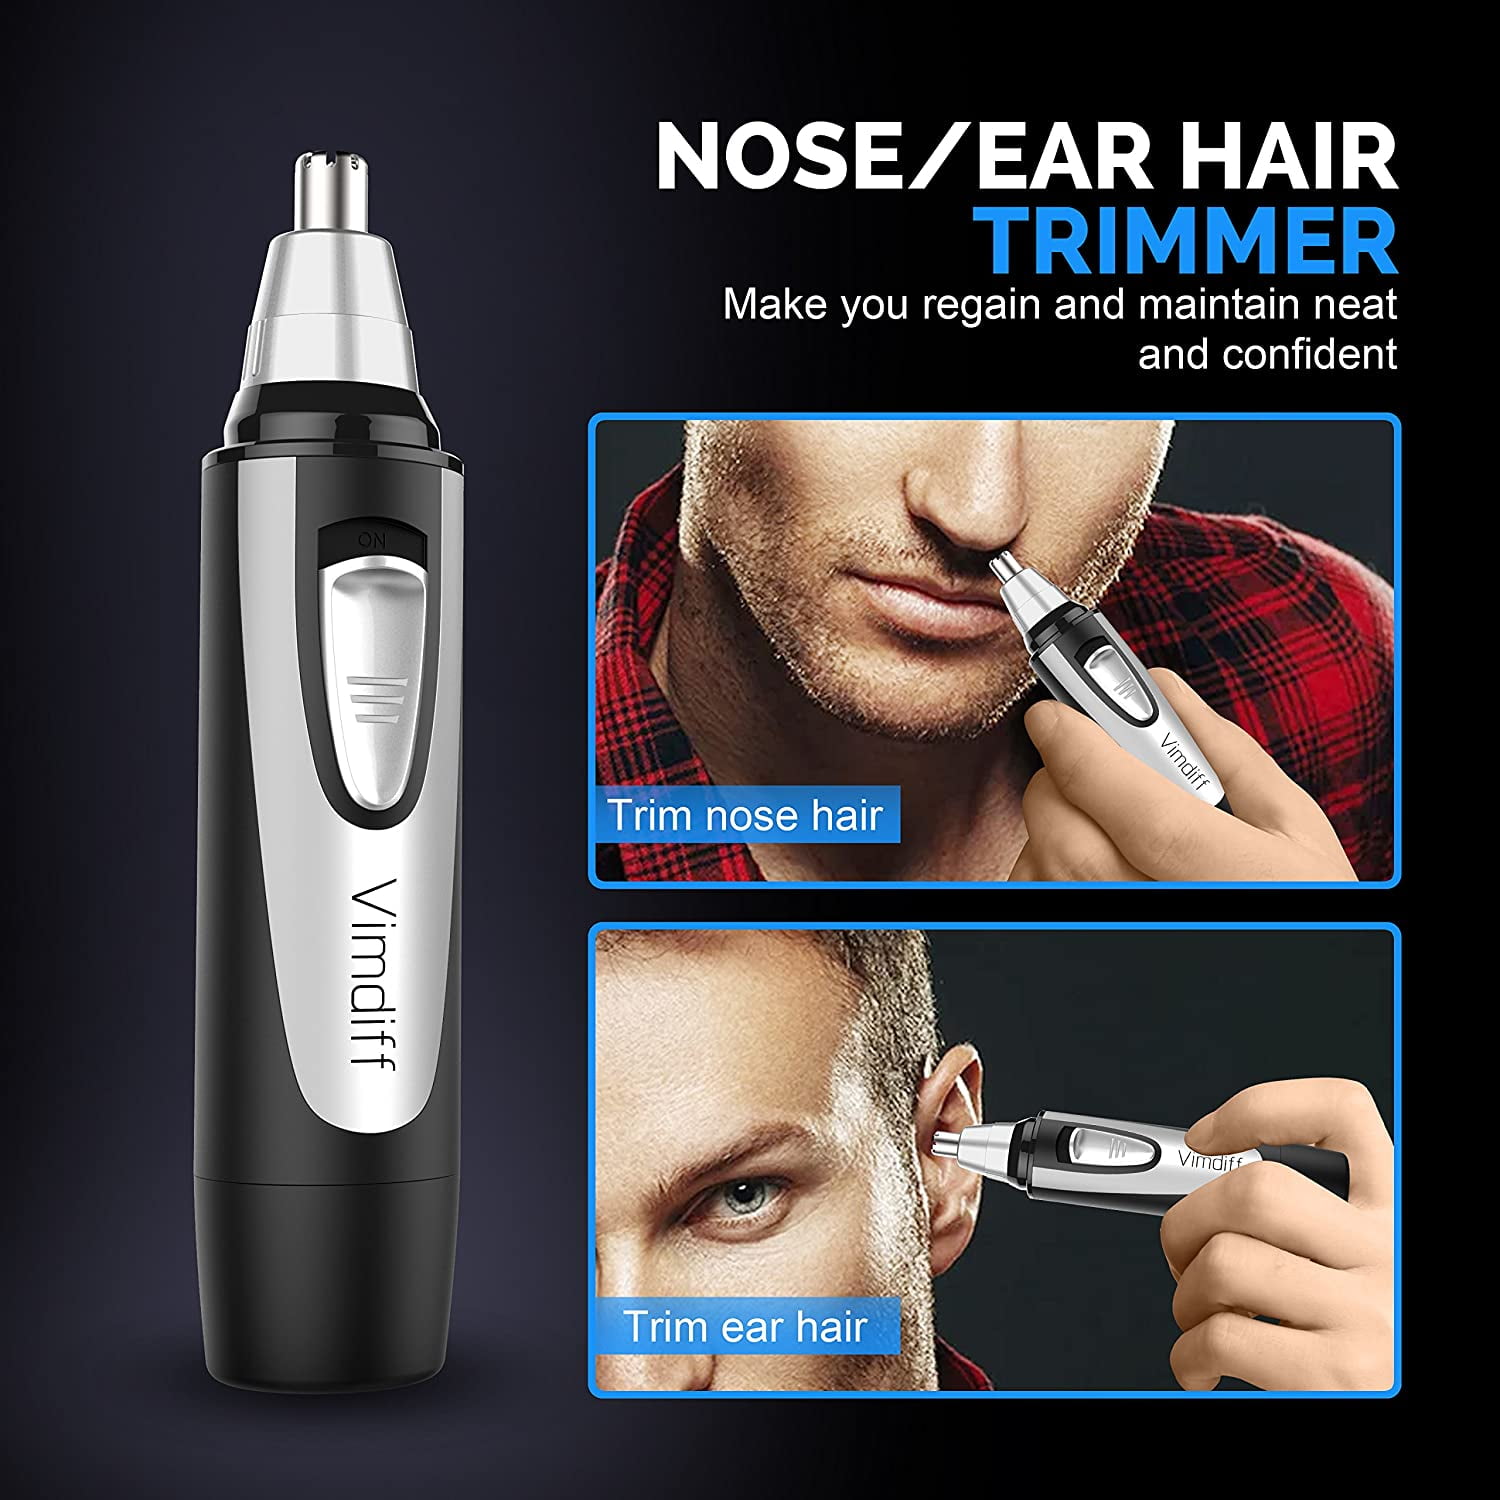 nægte Hindre Quilt 2021 Professional Nose Ear Hair Trimmer for Men Women, Electric Nostril  Nasal Hair Clippers Trimmers Remover with Vacuum Cleaning System, IPX7  Waterproof, Mute Motor, Wet/Dry, Battery-Operated - Walmart.com